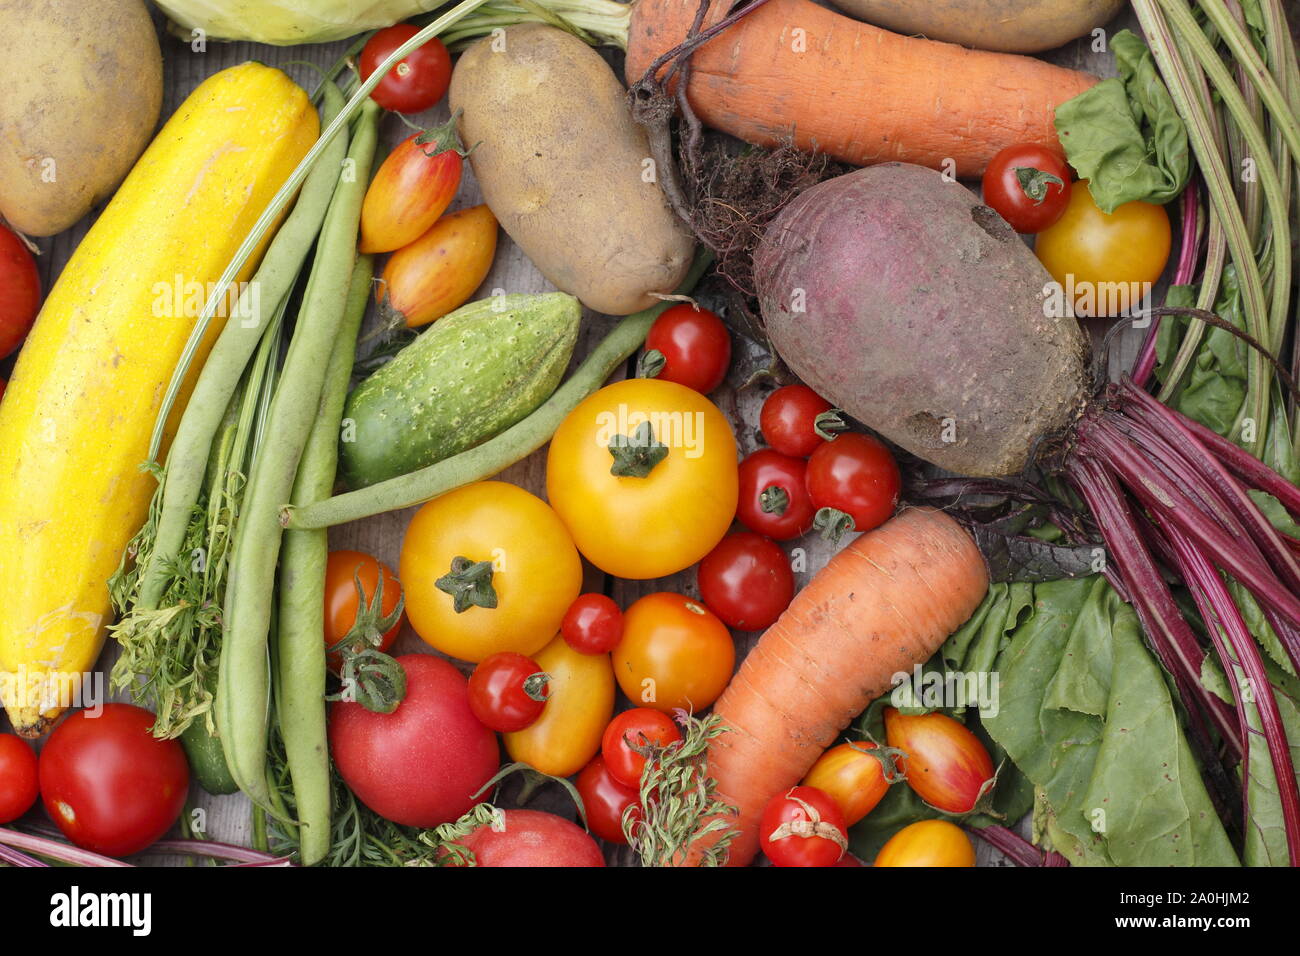 Freshly harvested homegrown organic vegetables including courgette, green beans, beetroot, carrot, potatoes, tomatoes and cucumbers. UK Stock Photo